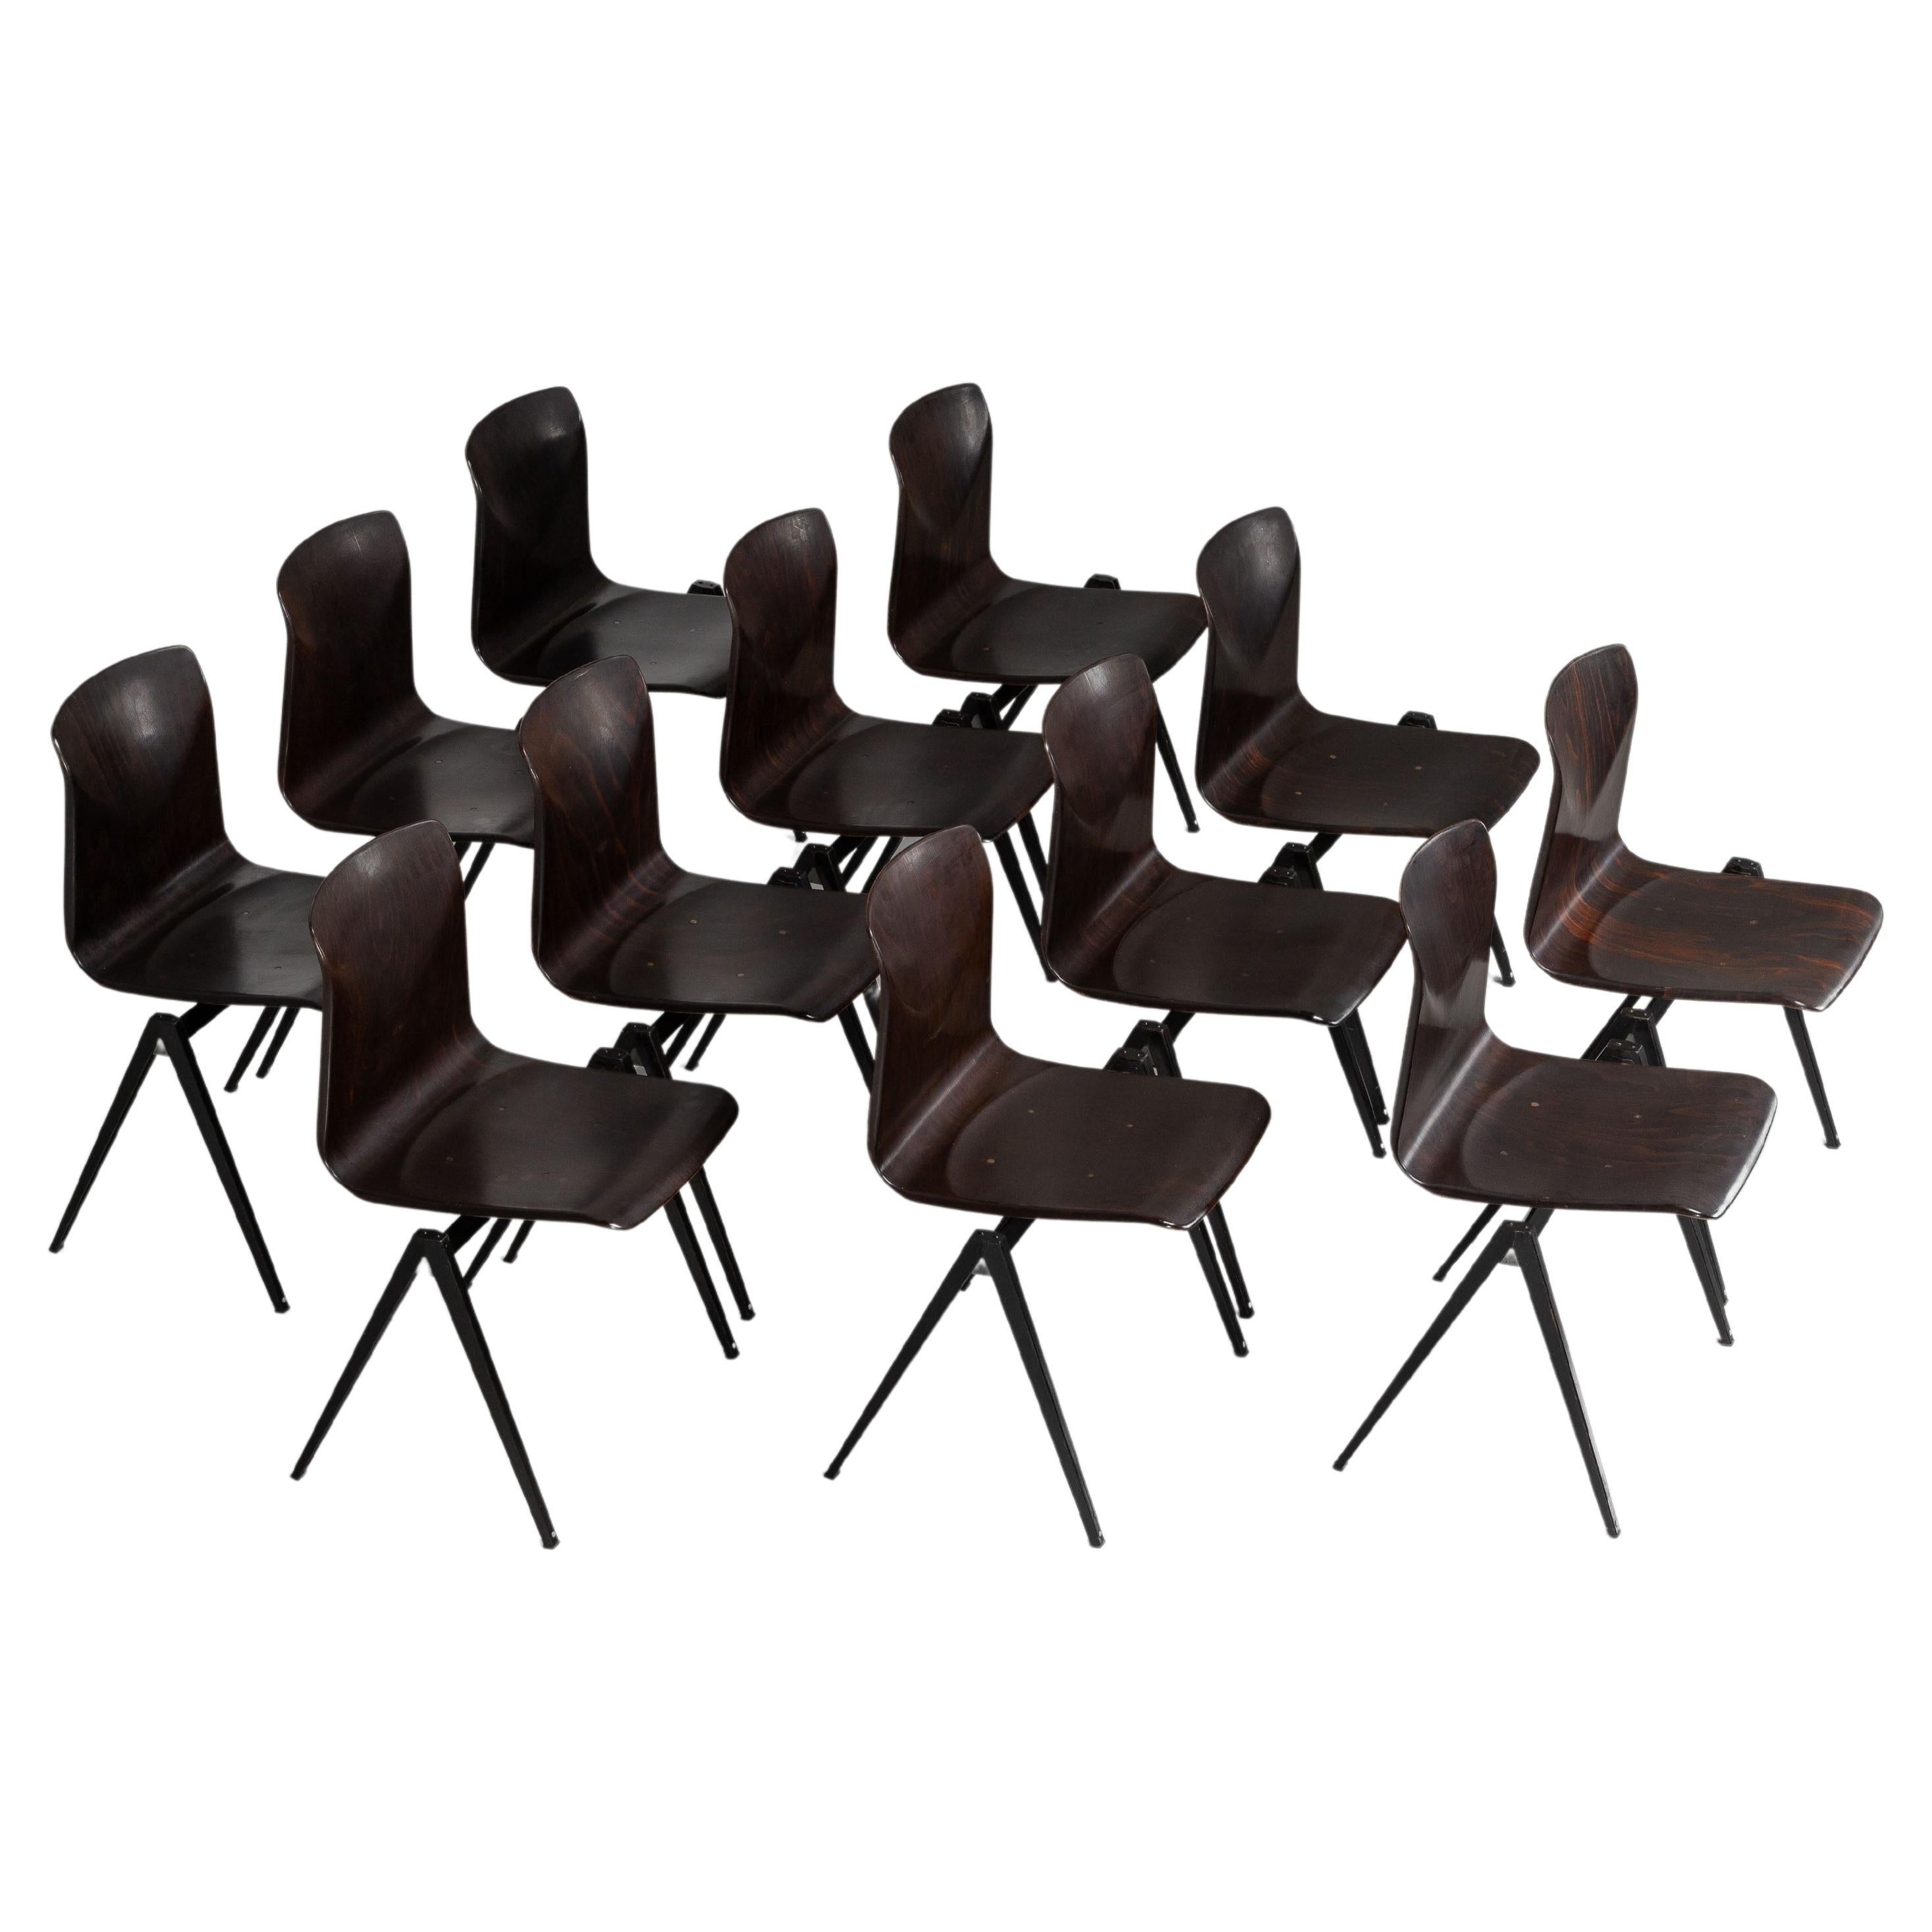 Elmar Flototto Pagholz stacking chairs Germany 1970 For Sale